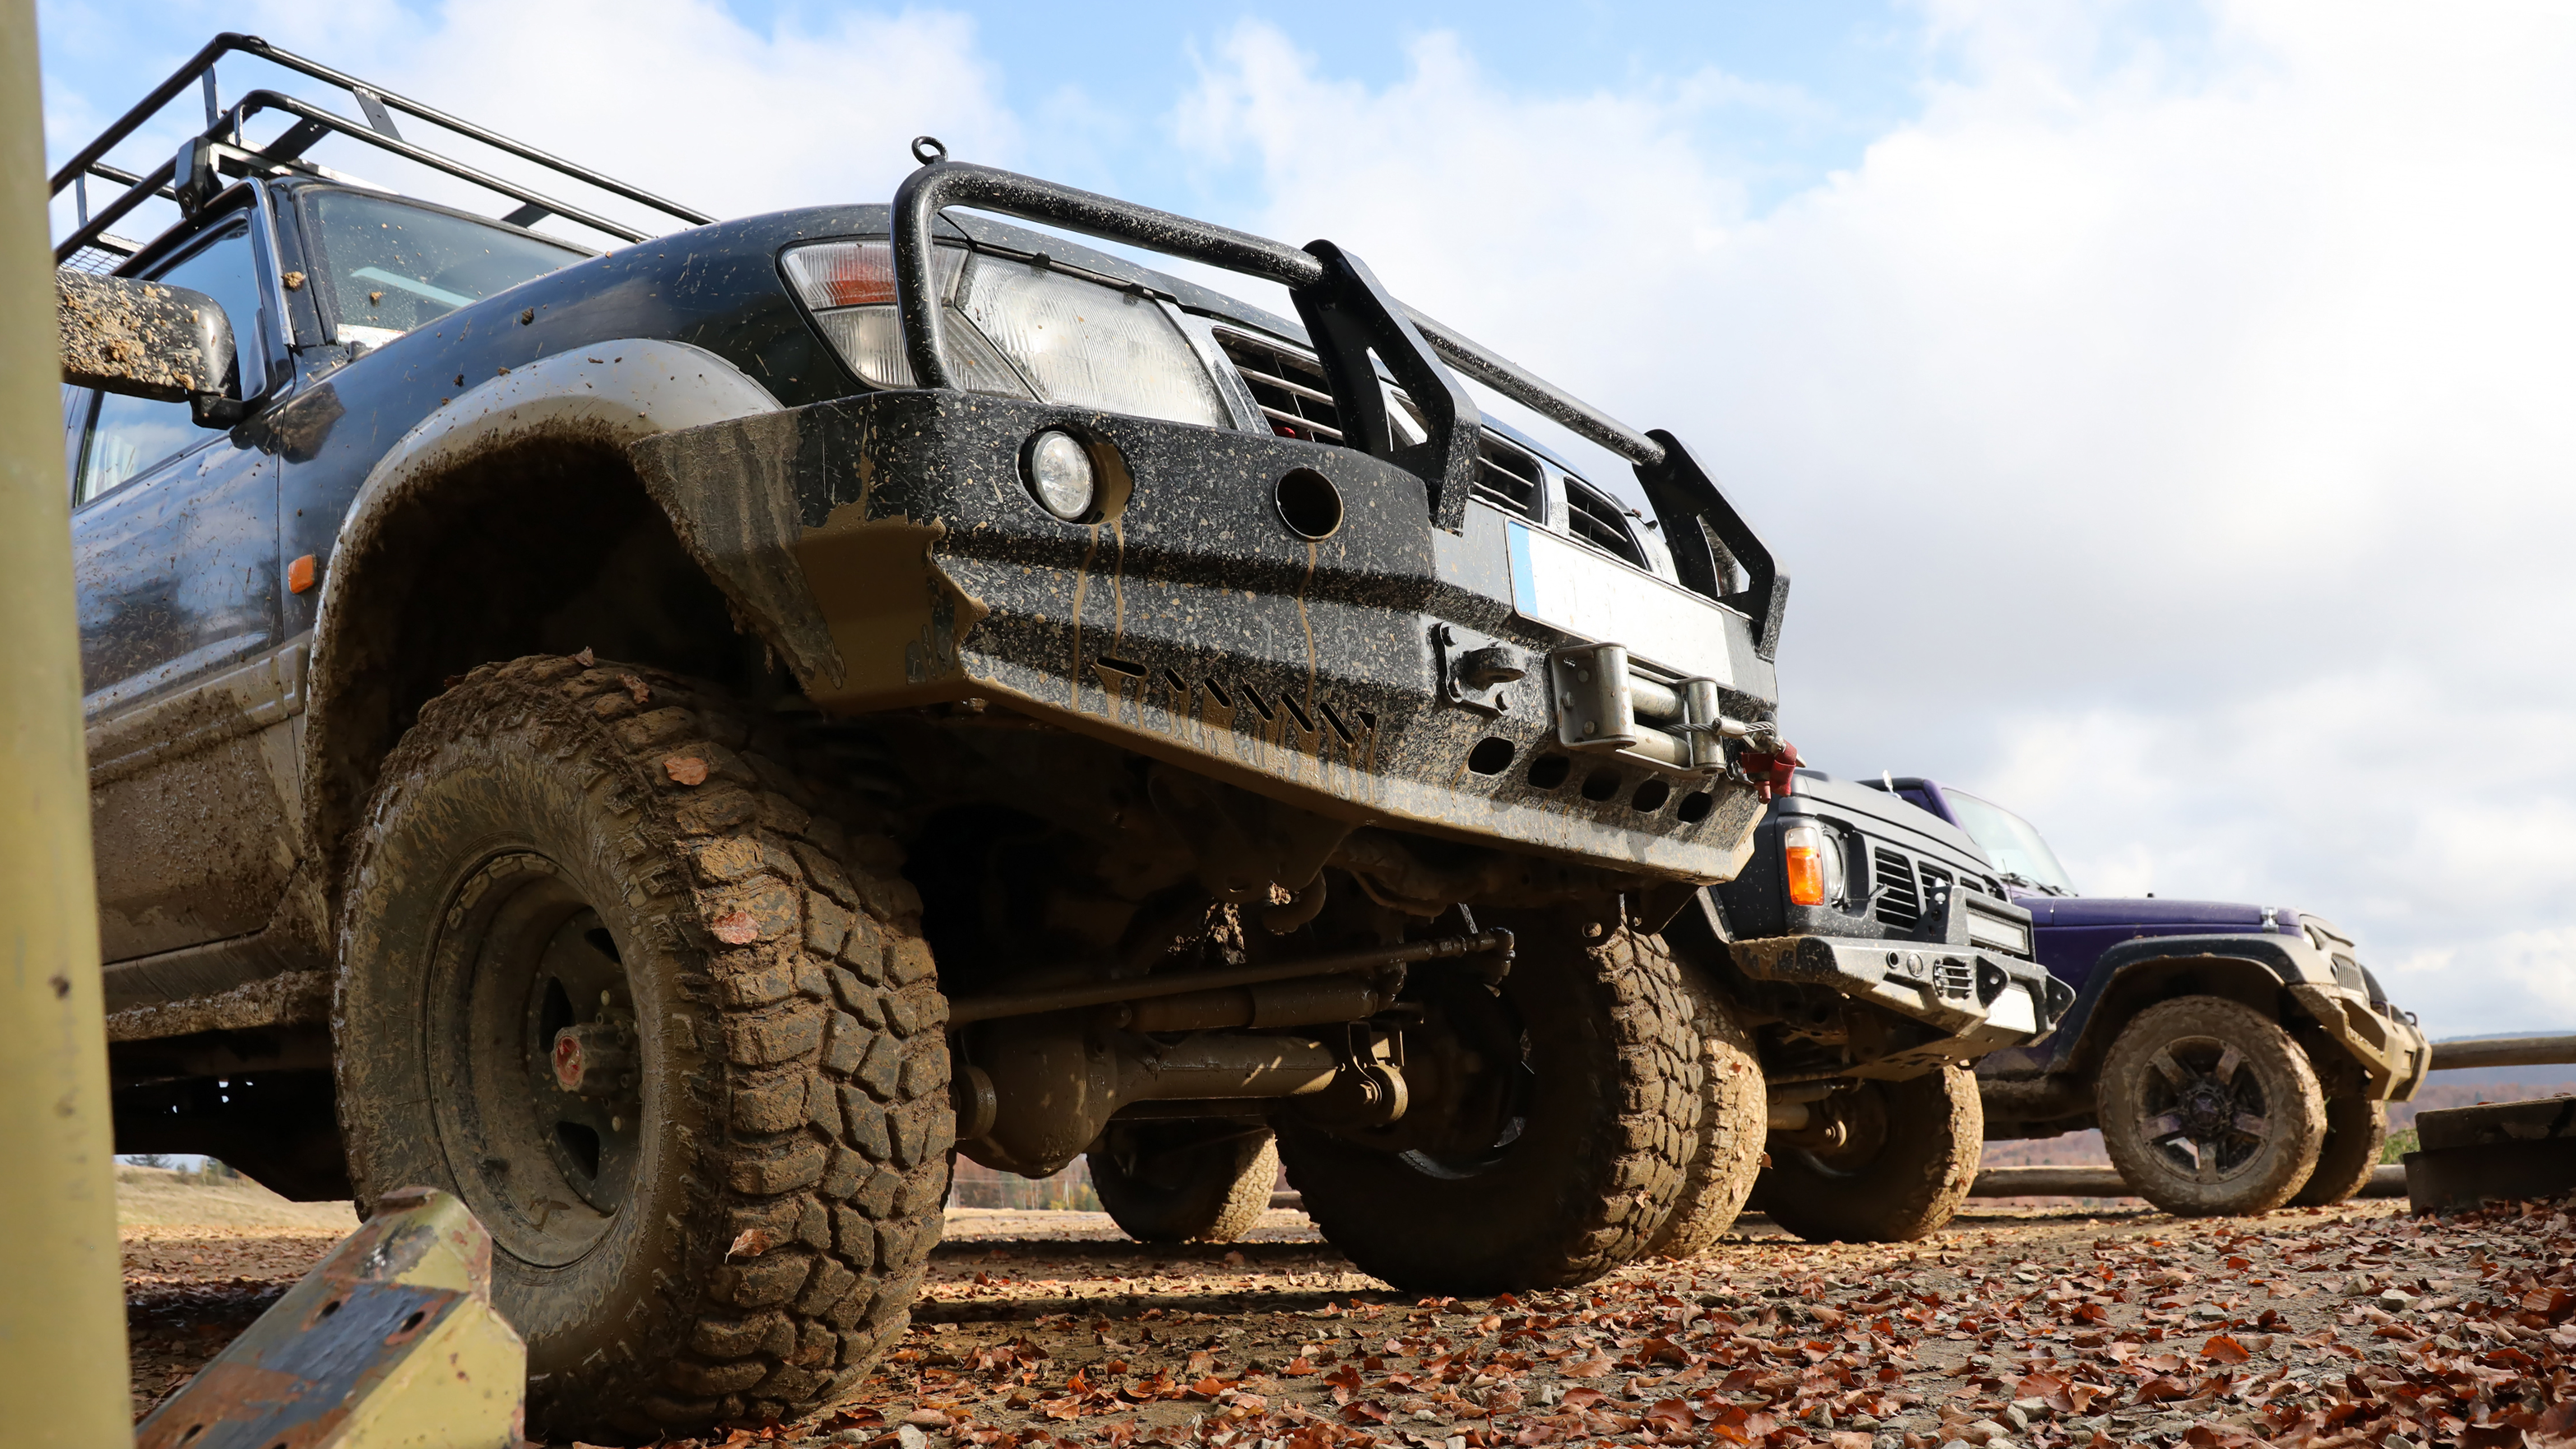 The Off-Roader's Guide: Tips, Tricks, and Pitfalls